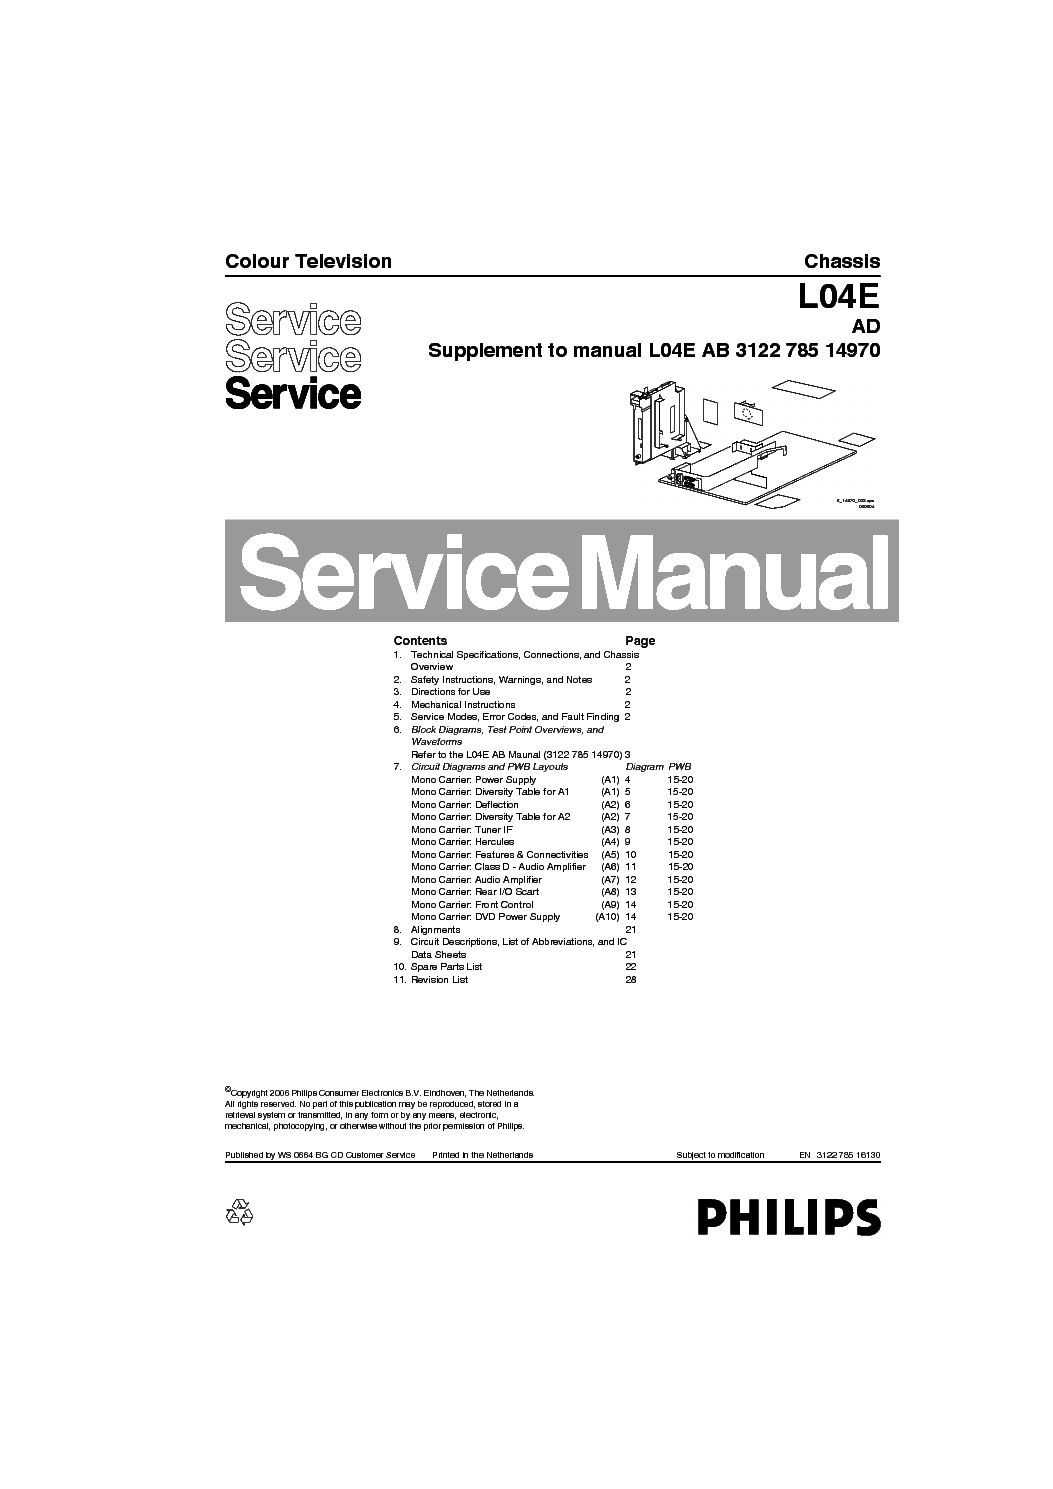 PHILIPS L04E AD CHASSIS service manual (1st page)